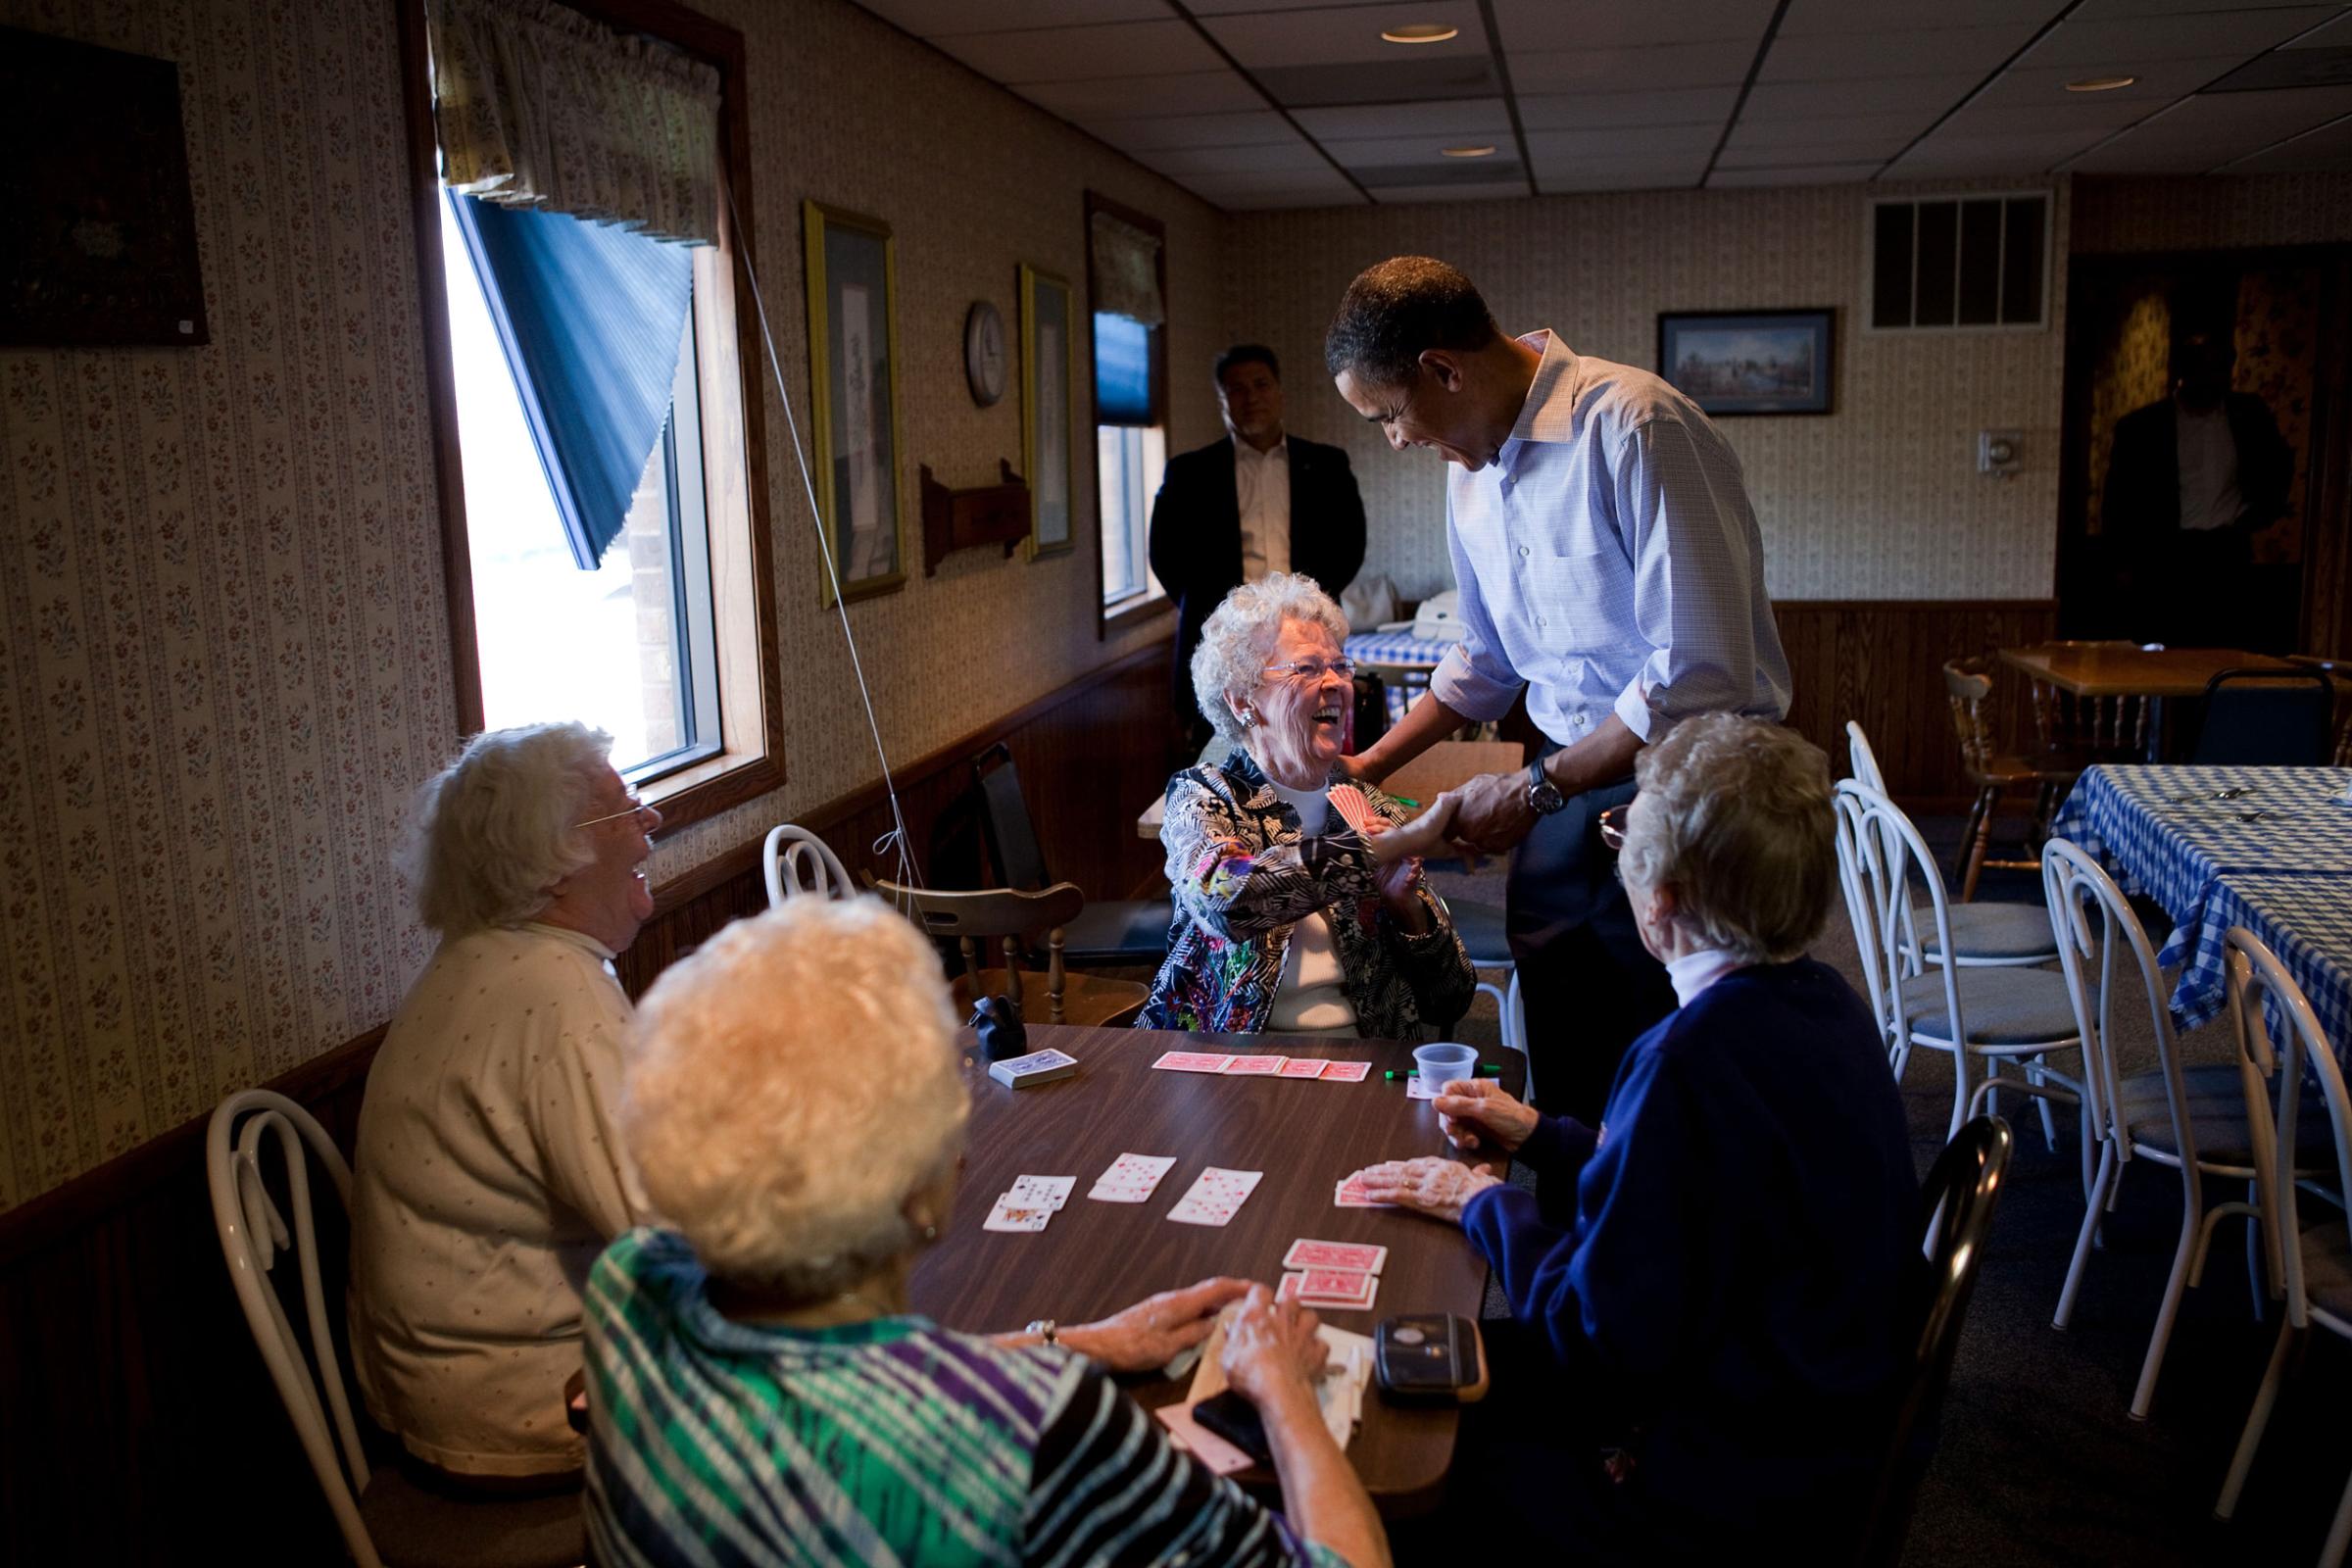 President Barack Obama visits with patrons at Jerry's Family Restaurant in Mount Pleasant, Iowa, April 27, 2010